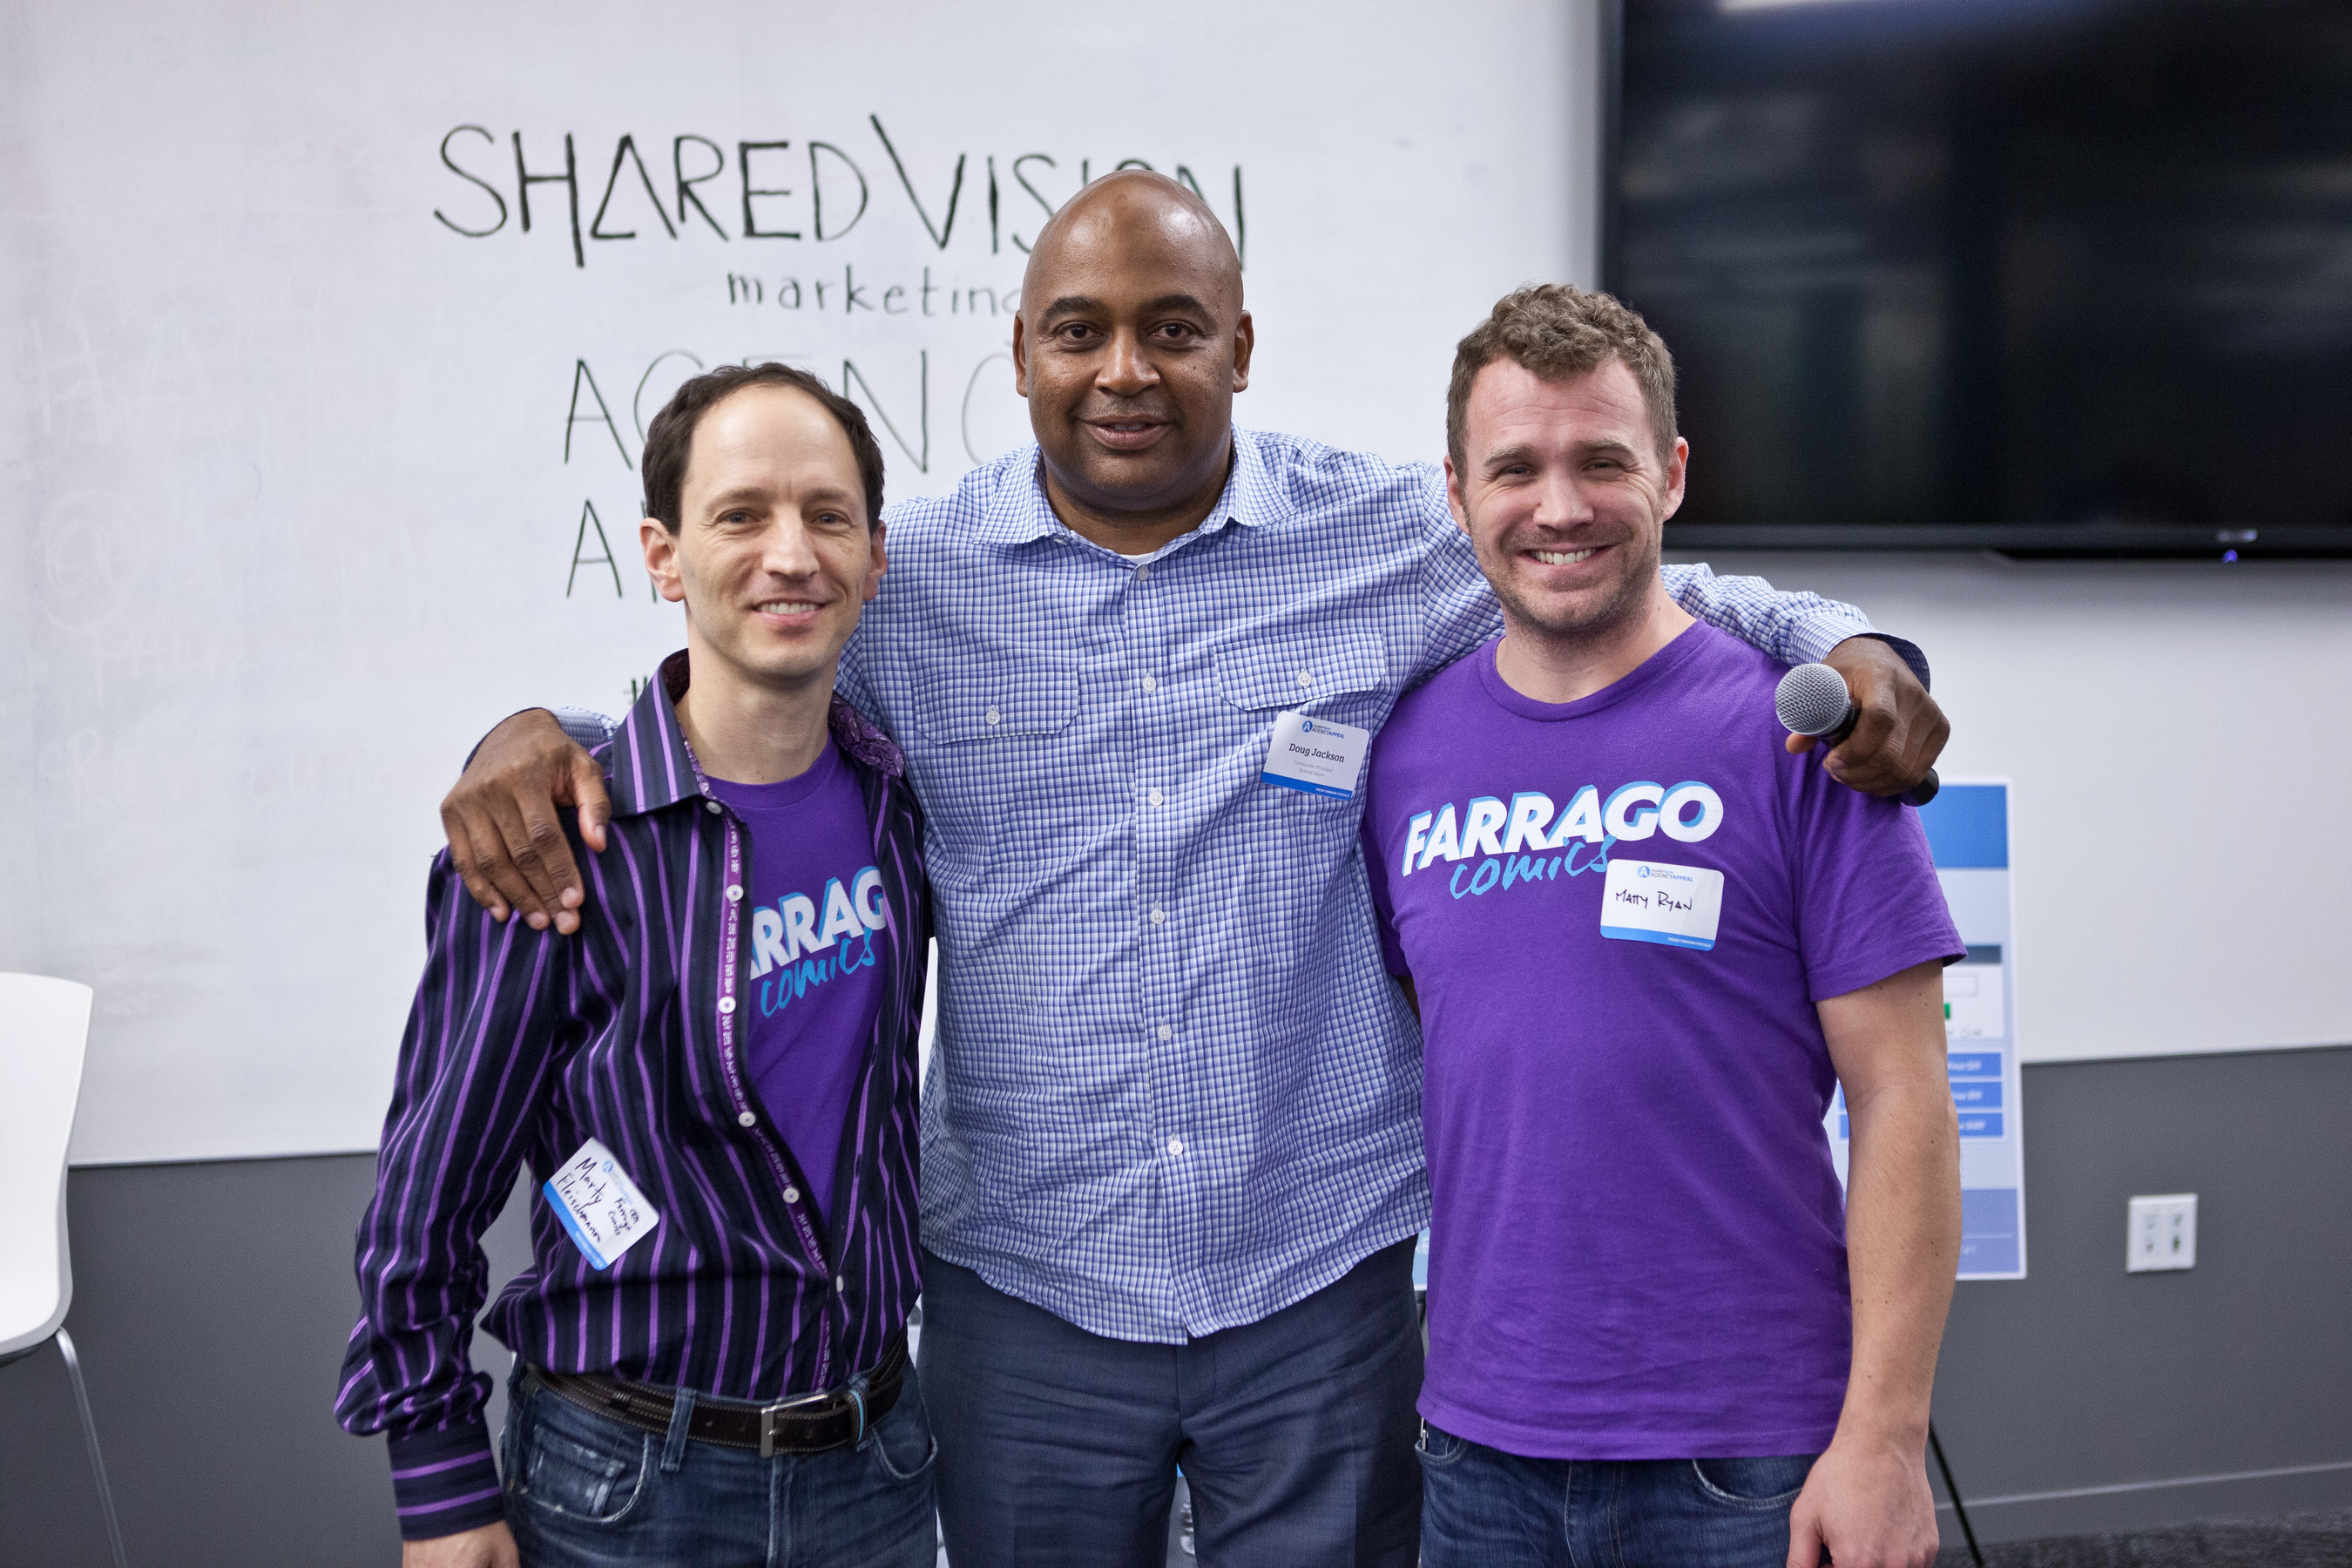 Startup Farrago Comics Wins Shared Vision Marketing's Agency Appeal Pitch Event.  Farrago pictured with Shared Vision Co-founder Douglas Jackson.